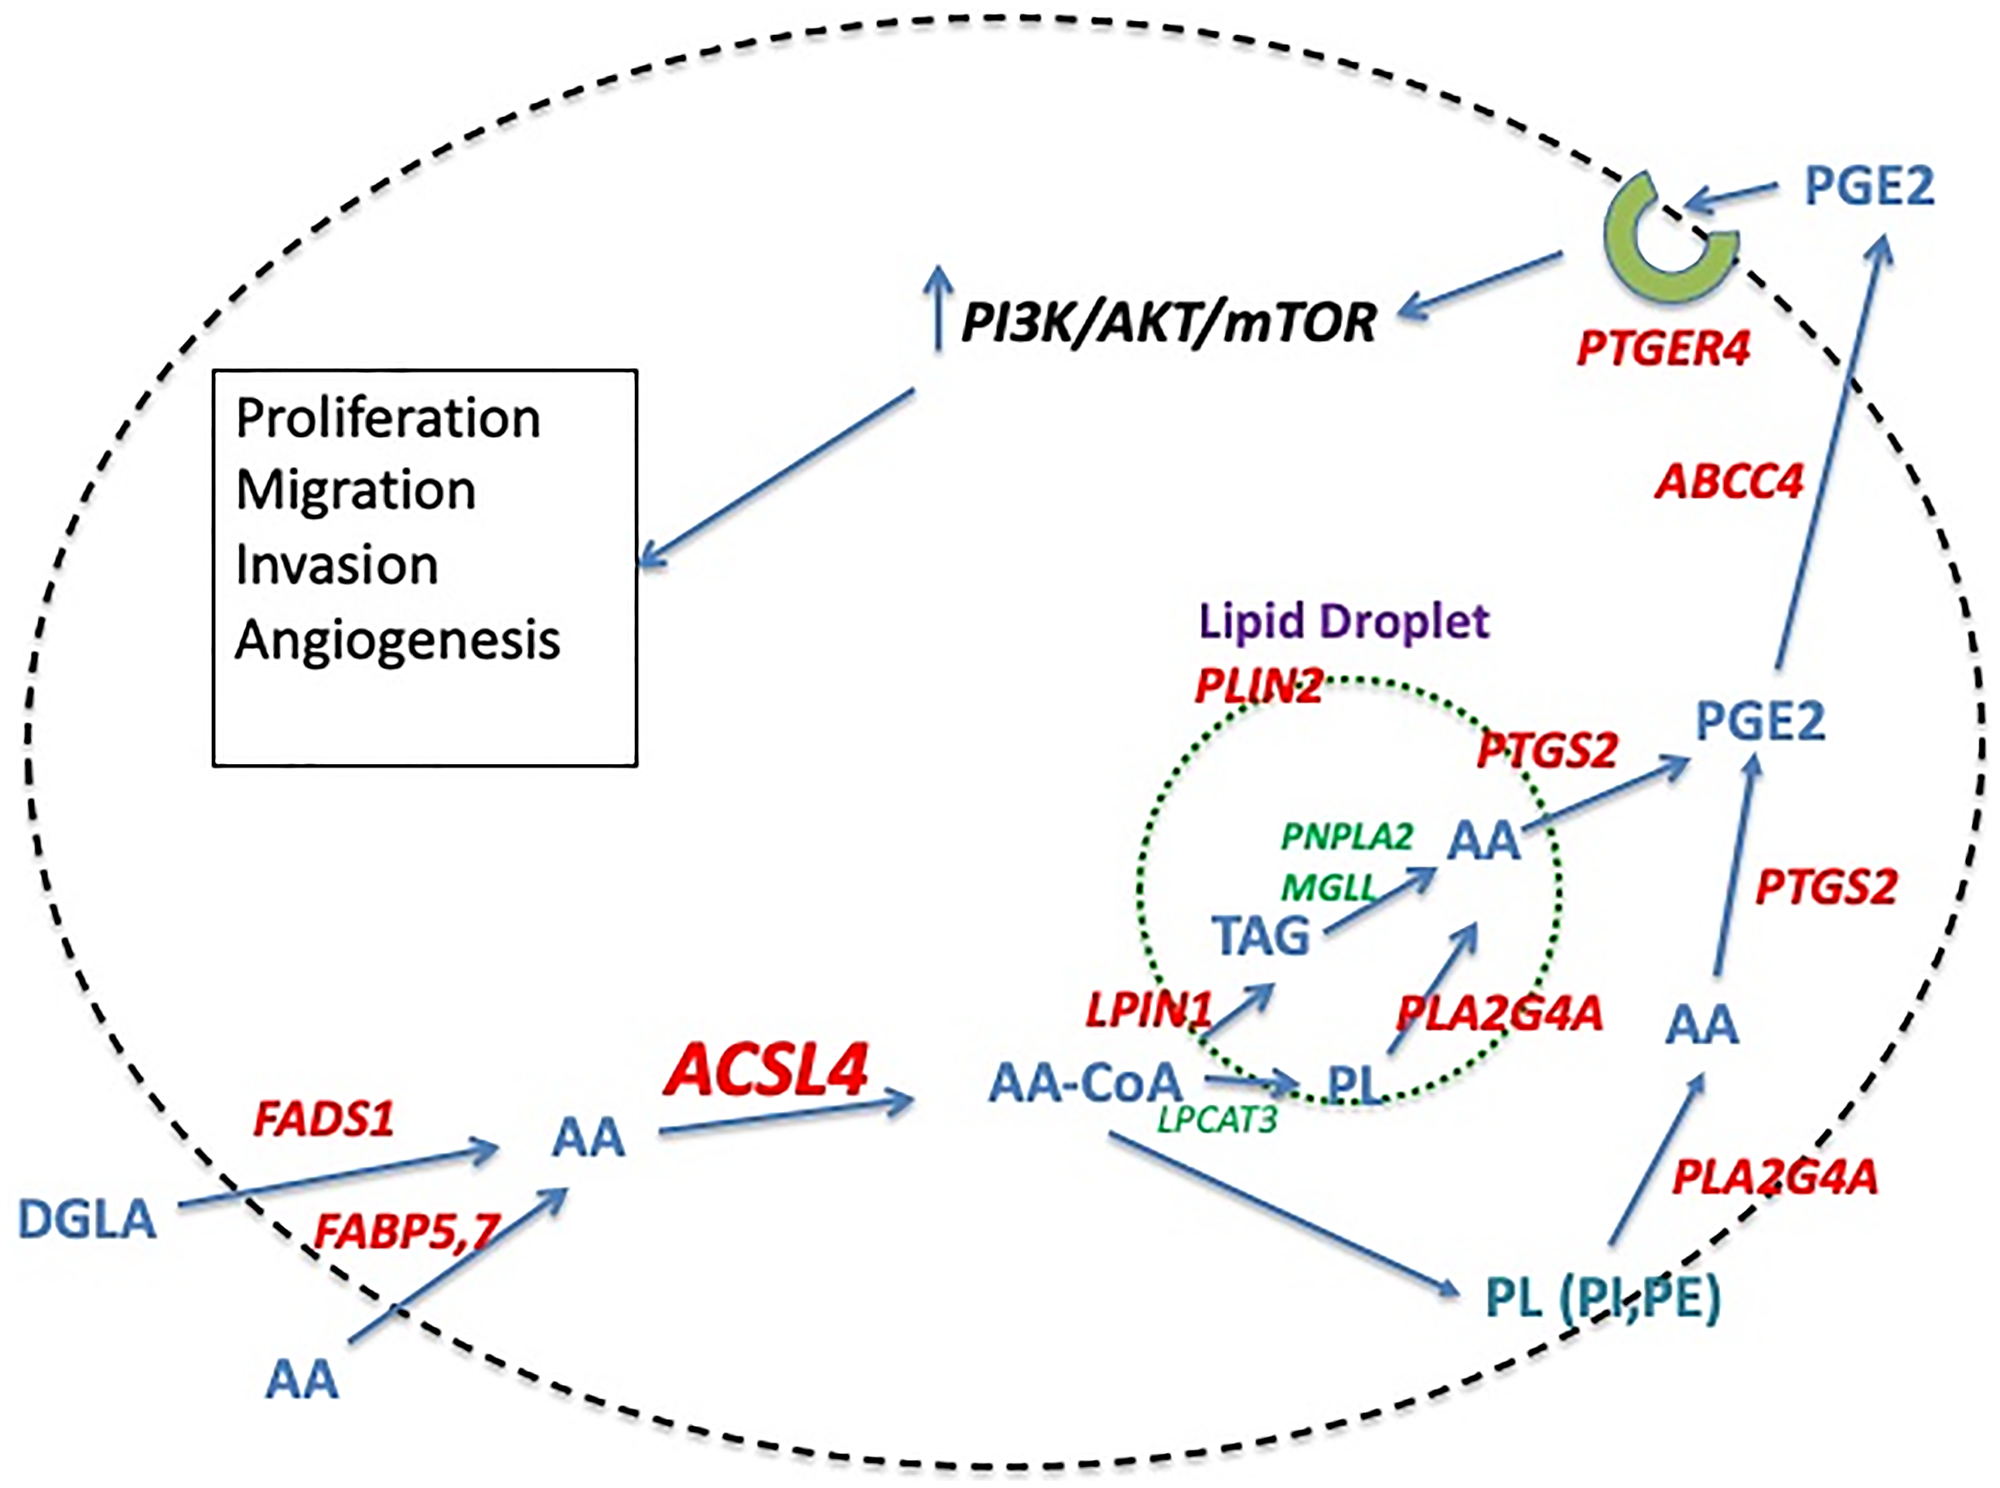 Proposed pathway of ACSL4-mediated stimulation of QNBC cells.